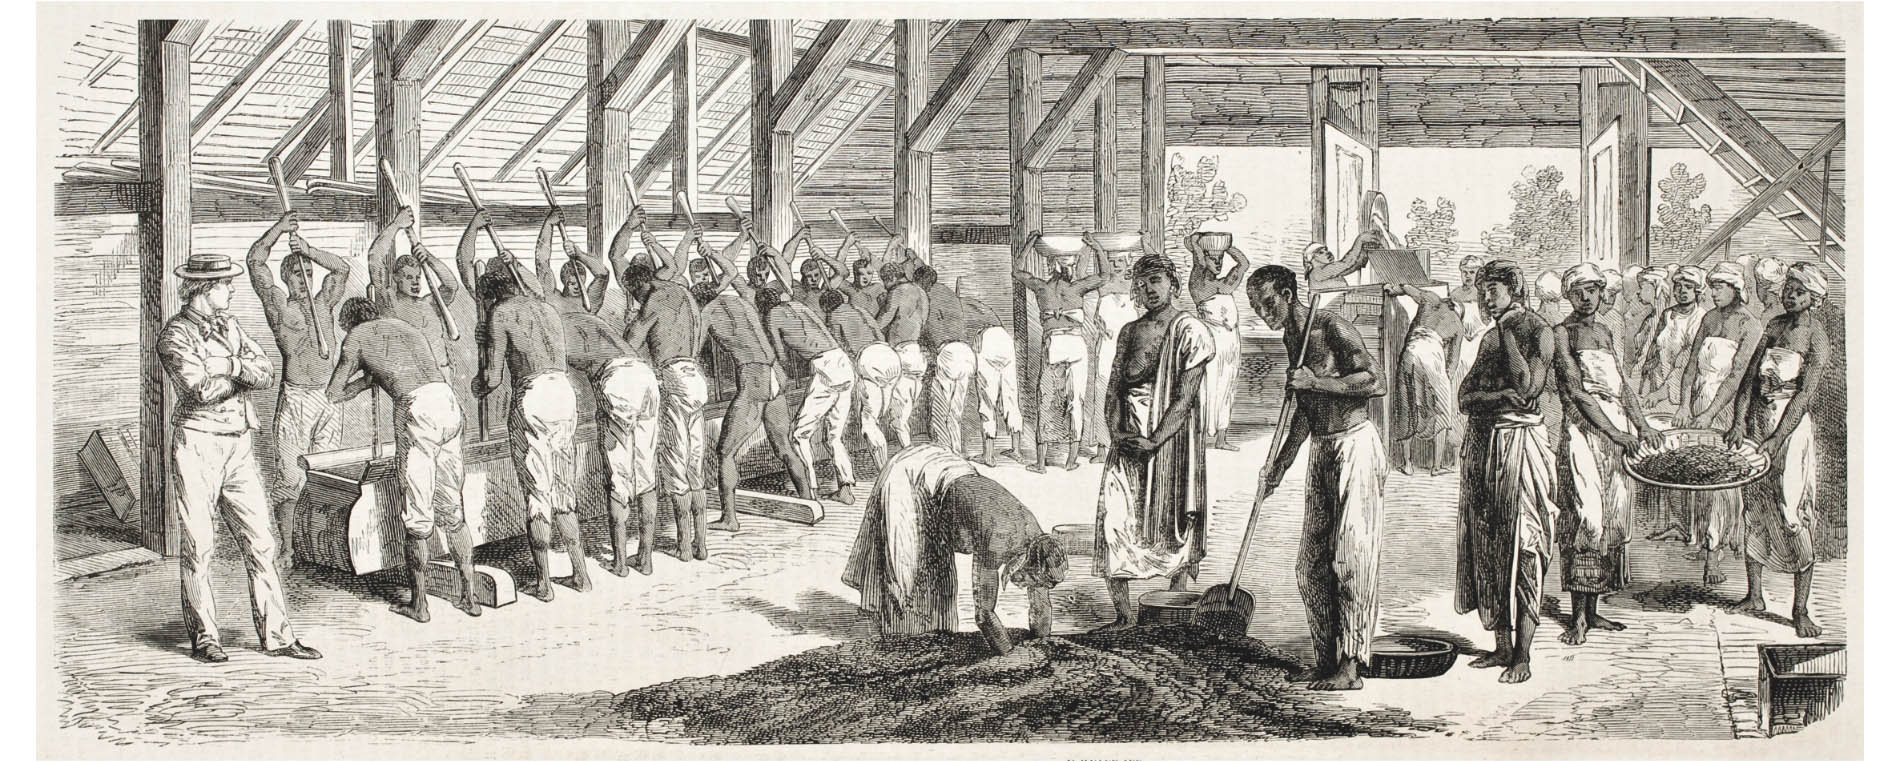 Coffee workers on colonial plantations